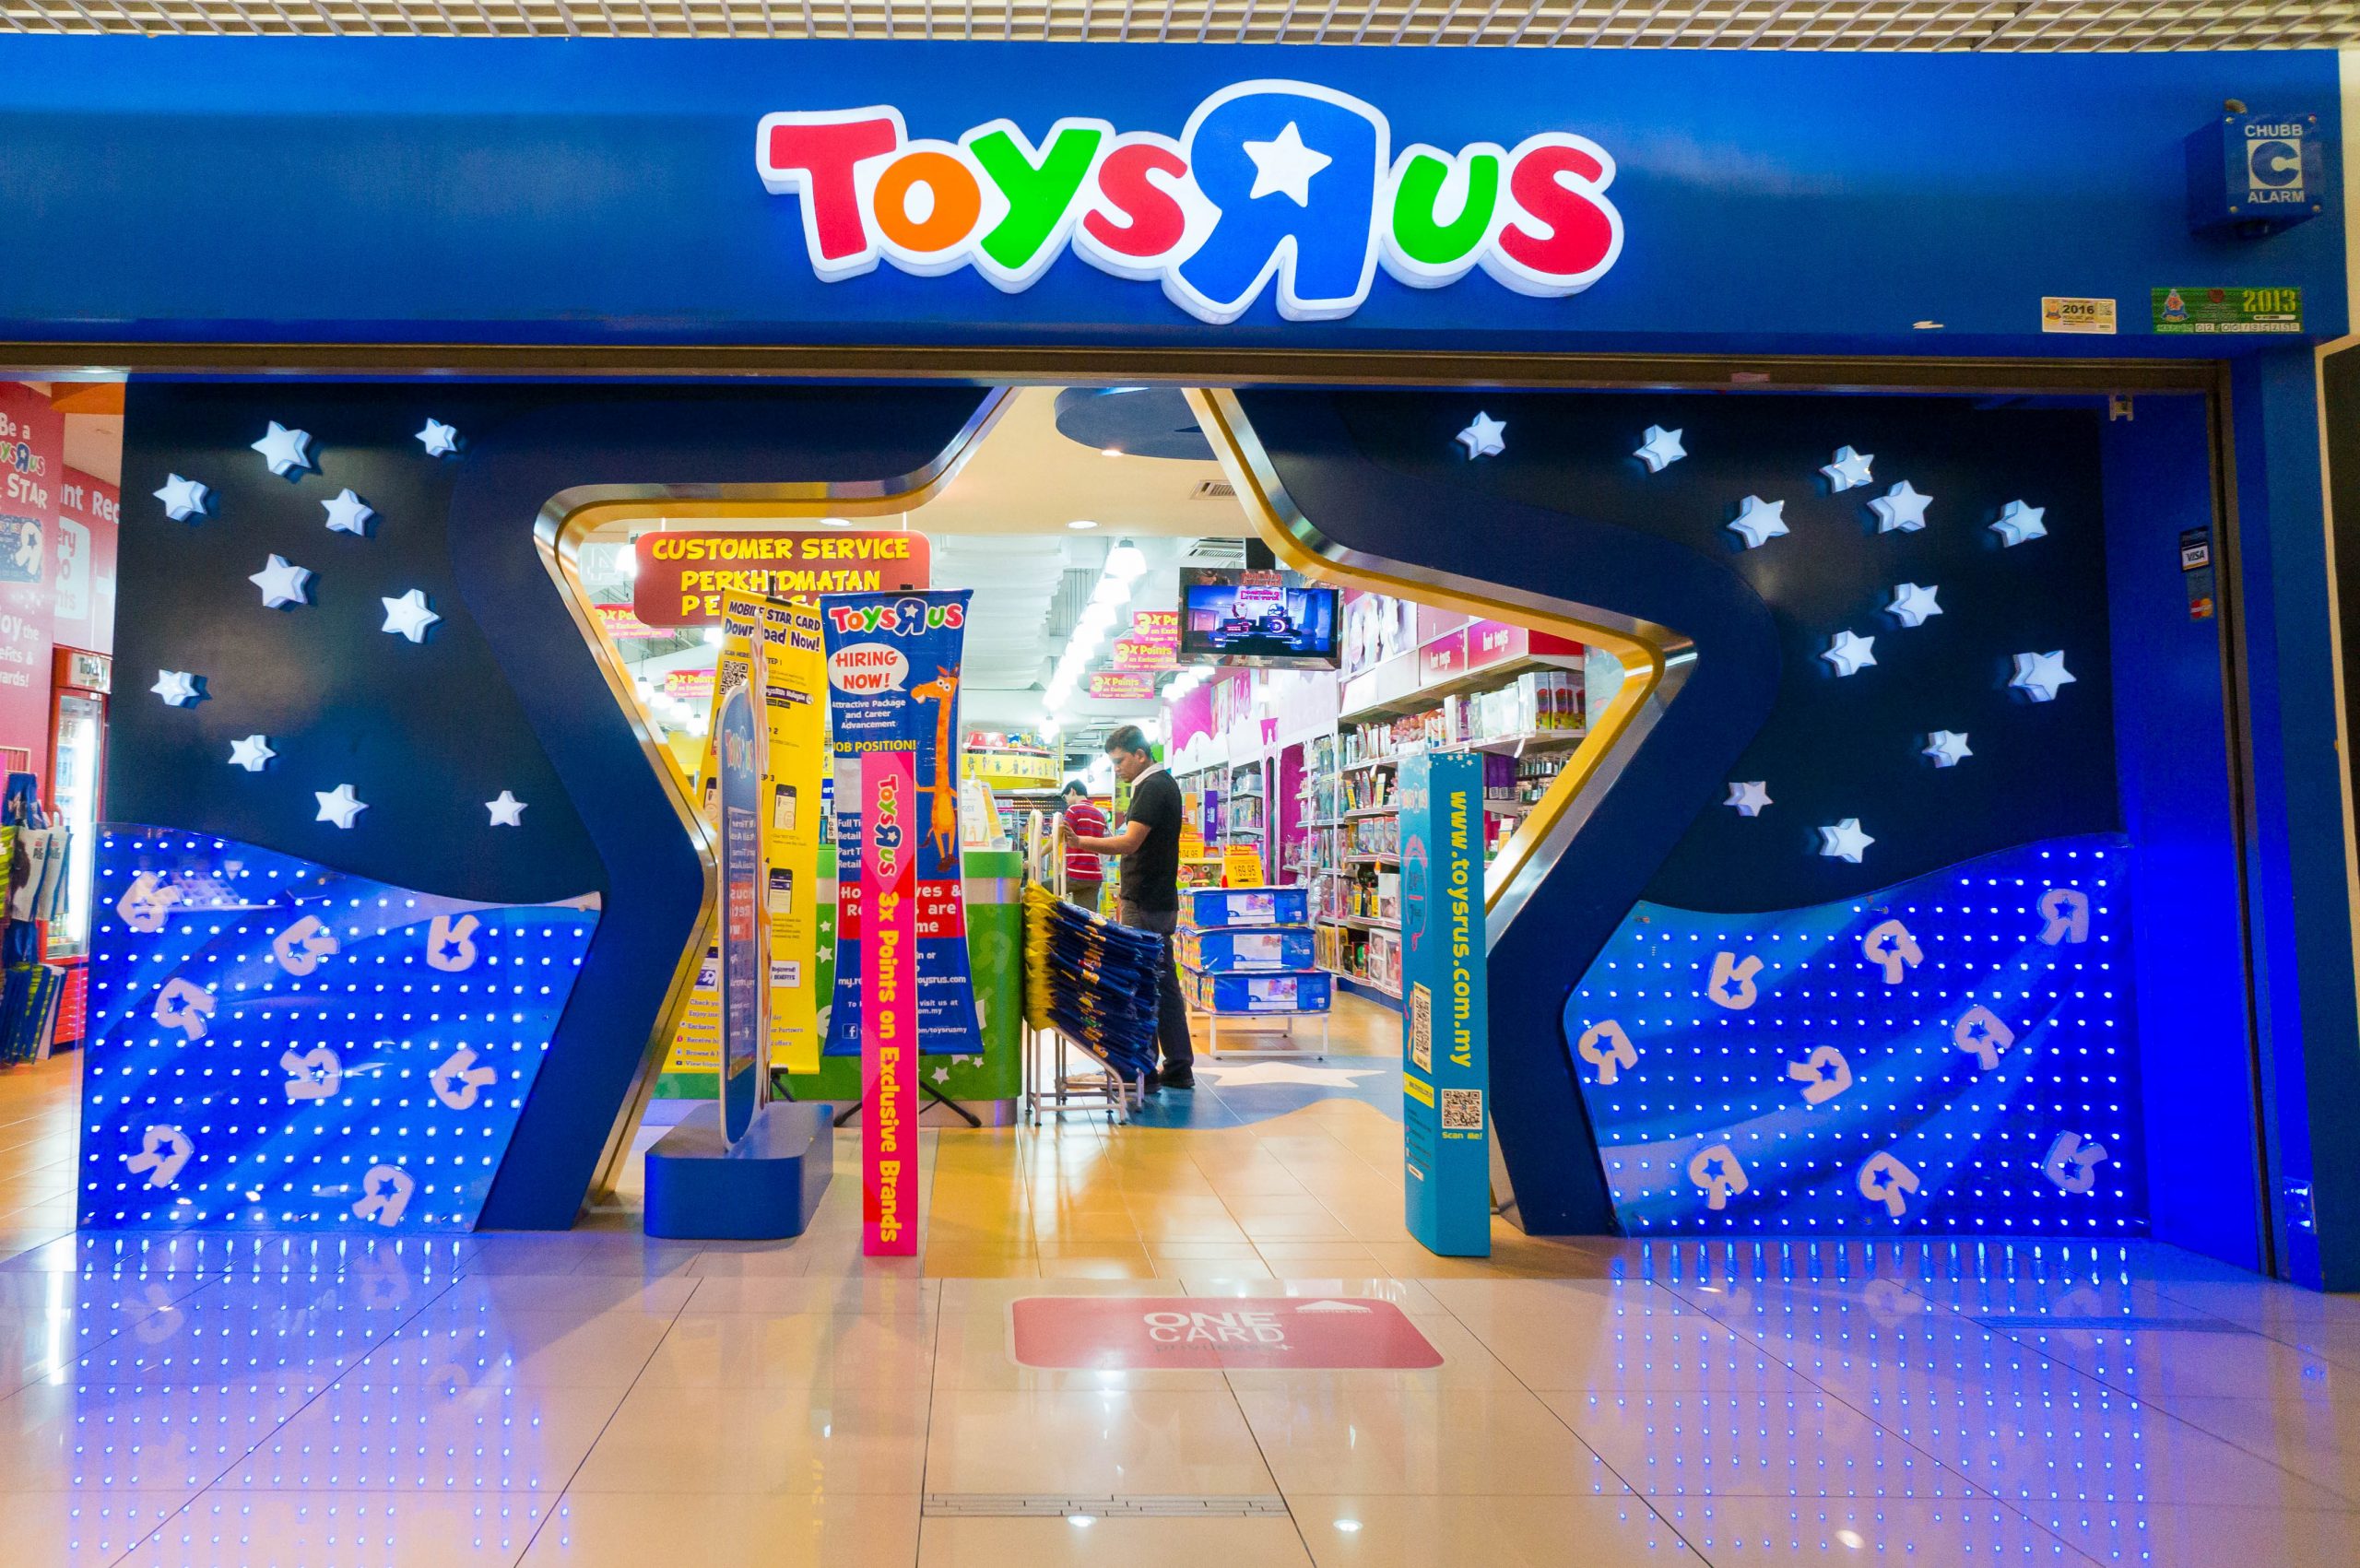 Toys “R” Us Reassembling Physical Store Network